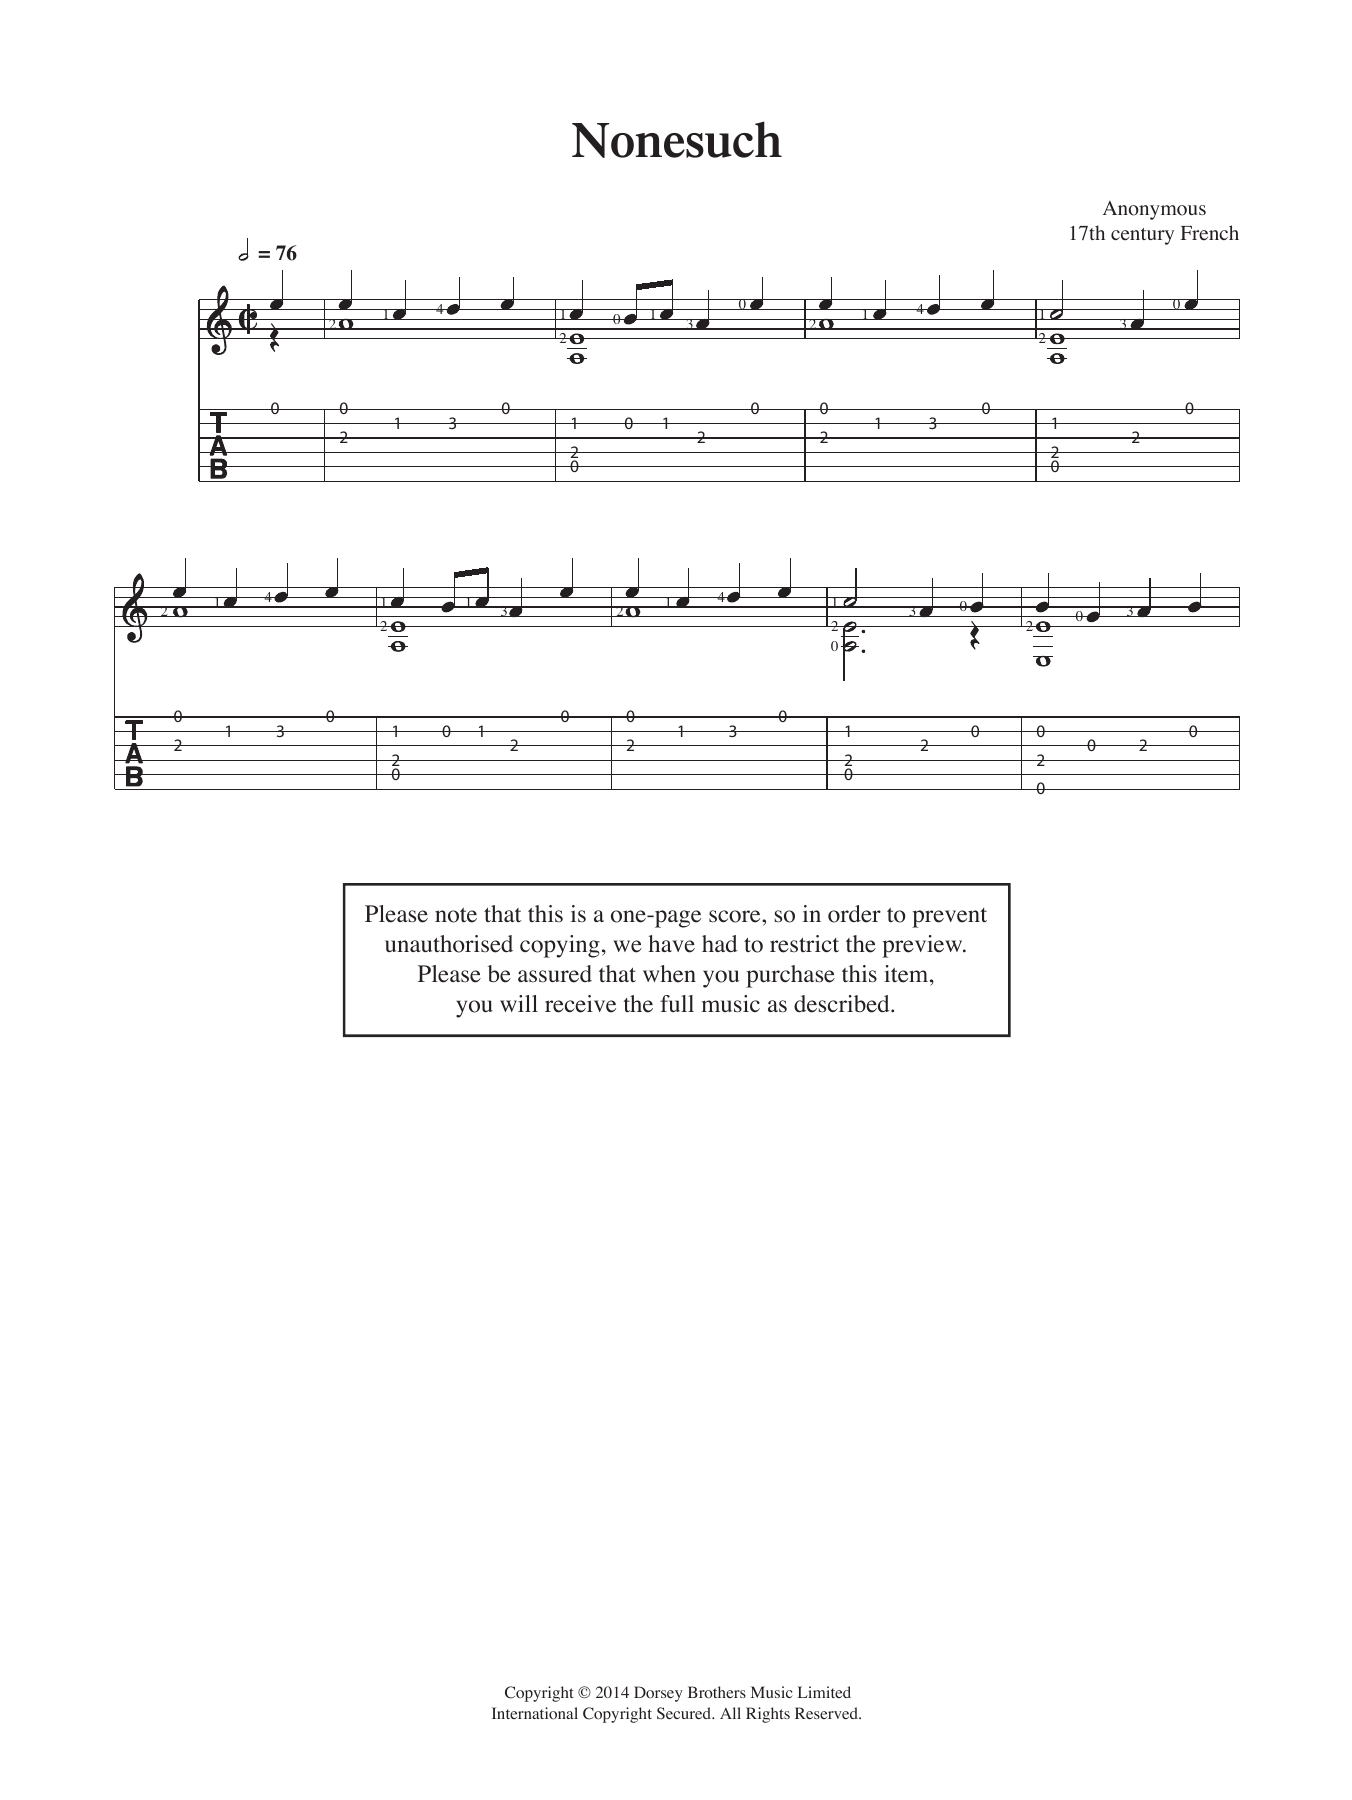 Download Anonymous Nonesuch Sheet Music